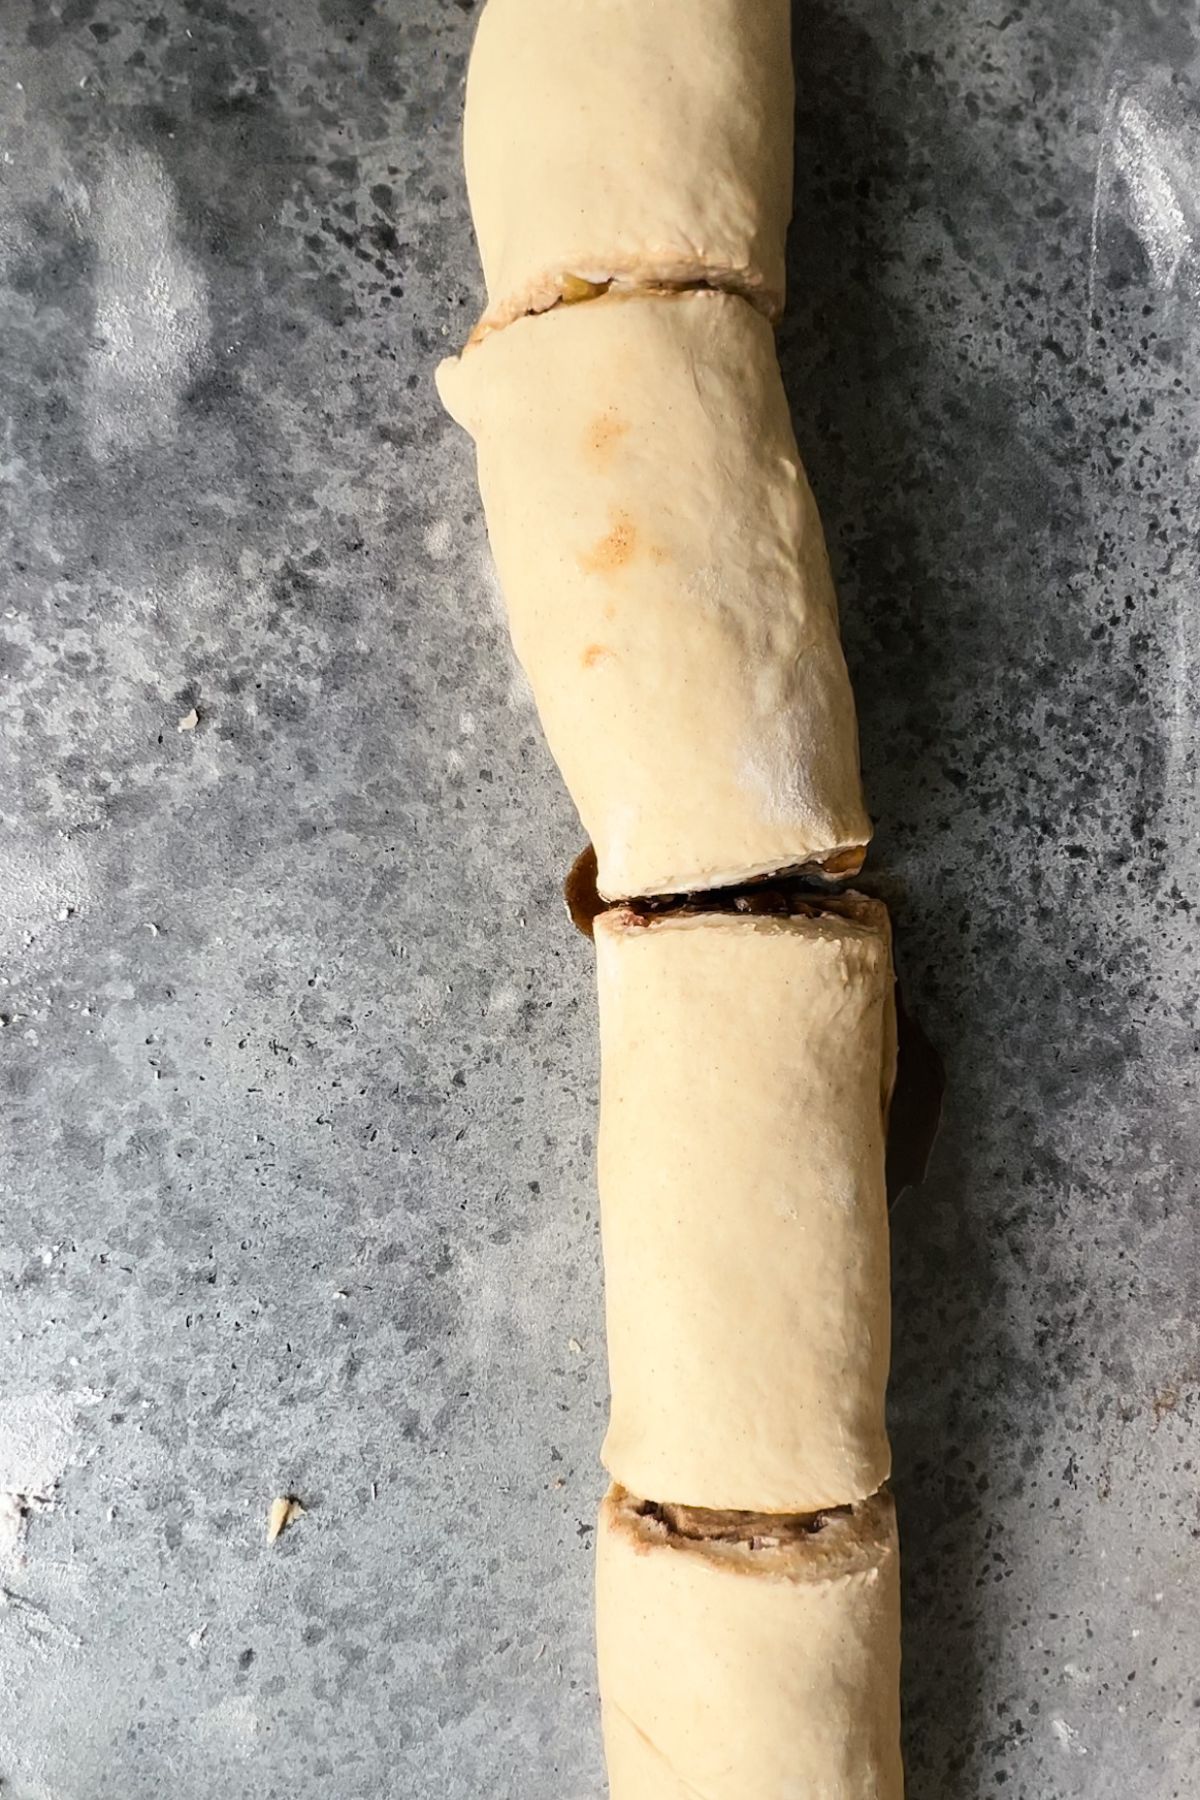 Cinnamon roll dough rolled into a cylinder and cut in fourths.